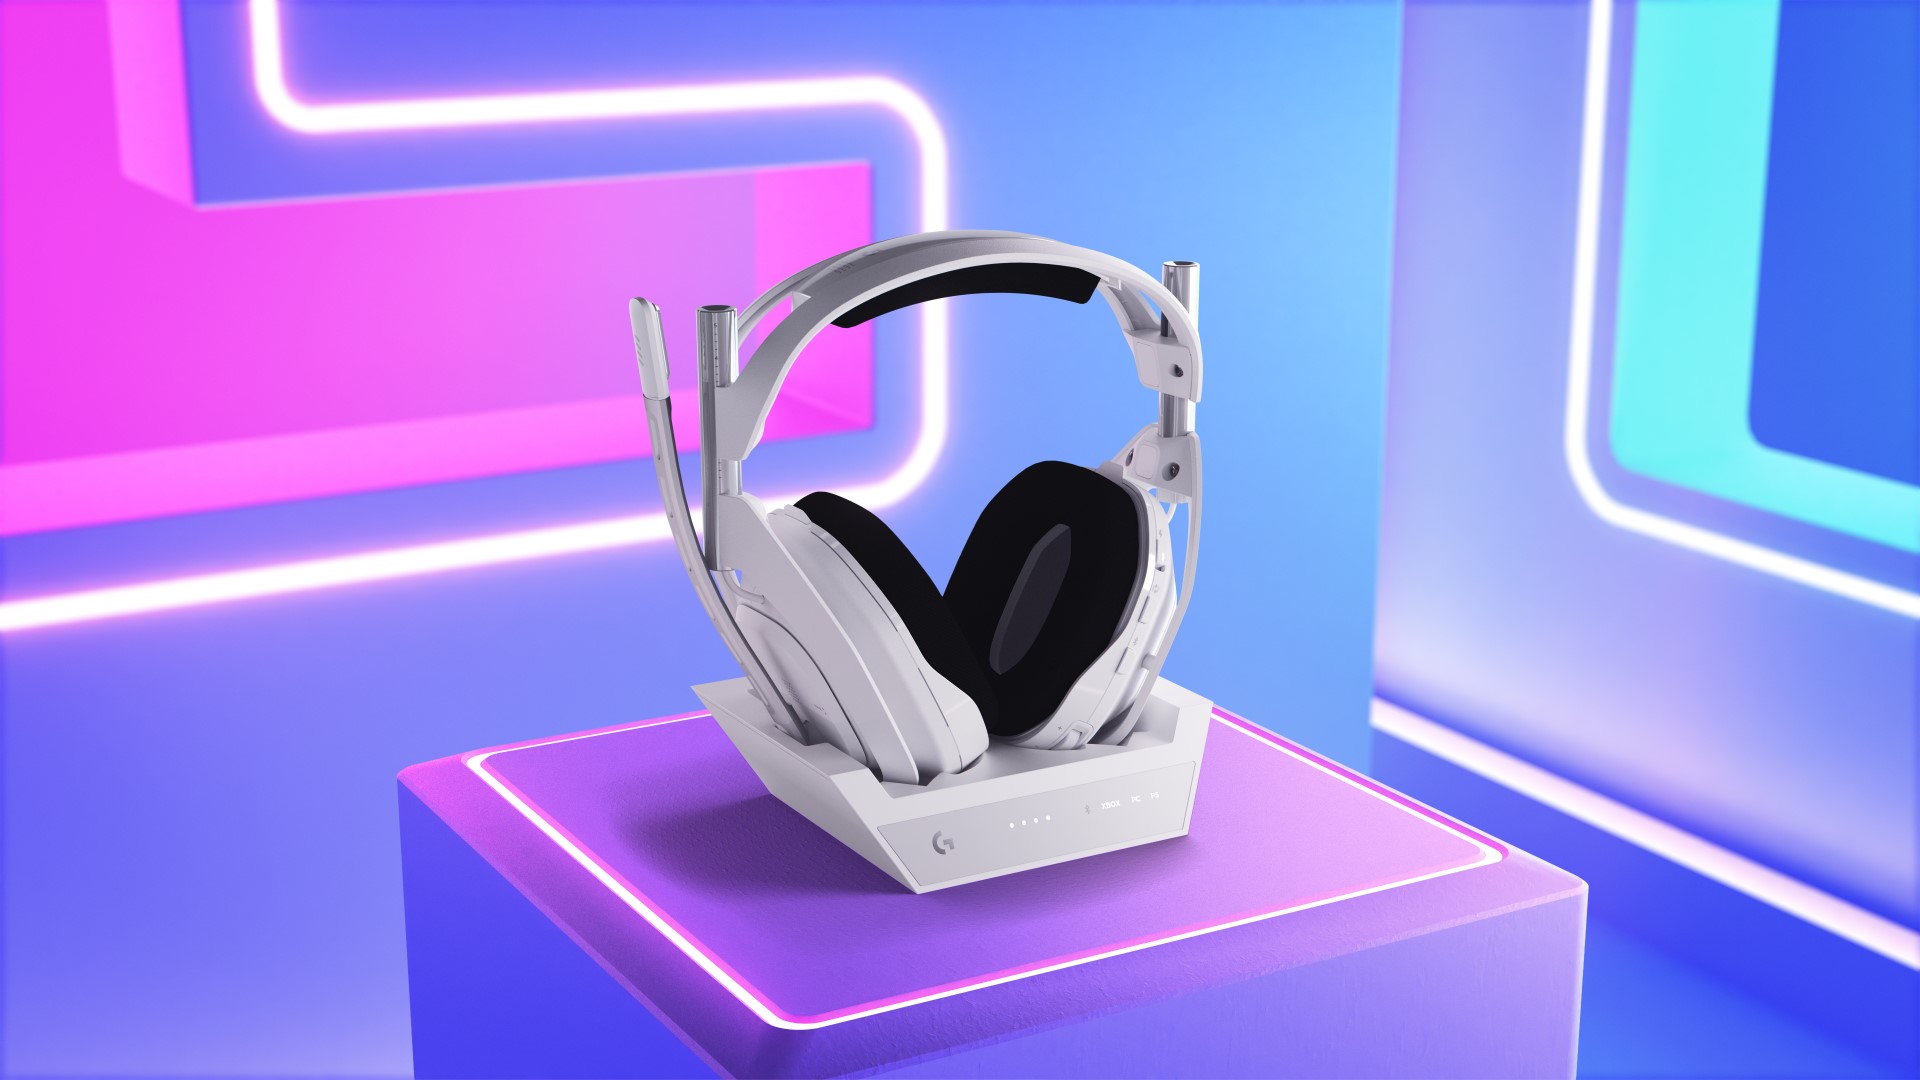 NEW Astro A50x Headset Review, FINALLY UPDATED! 